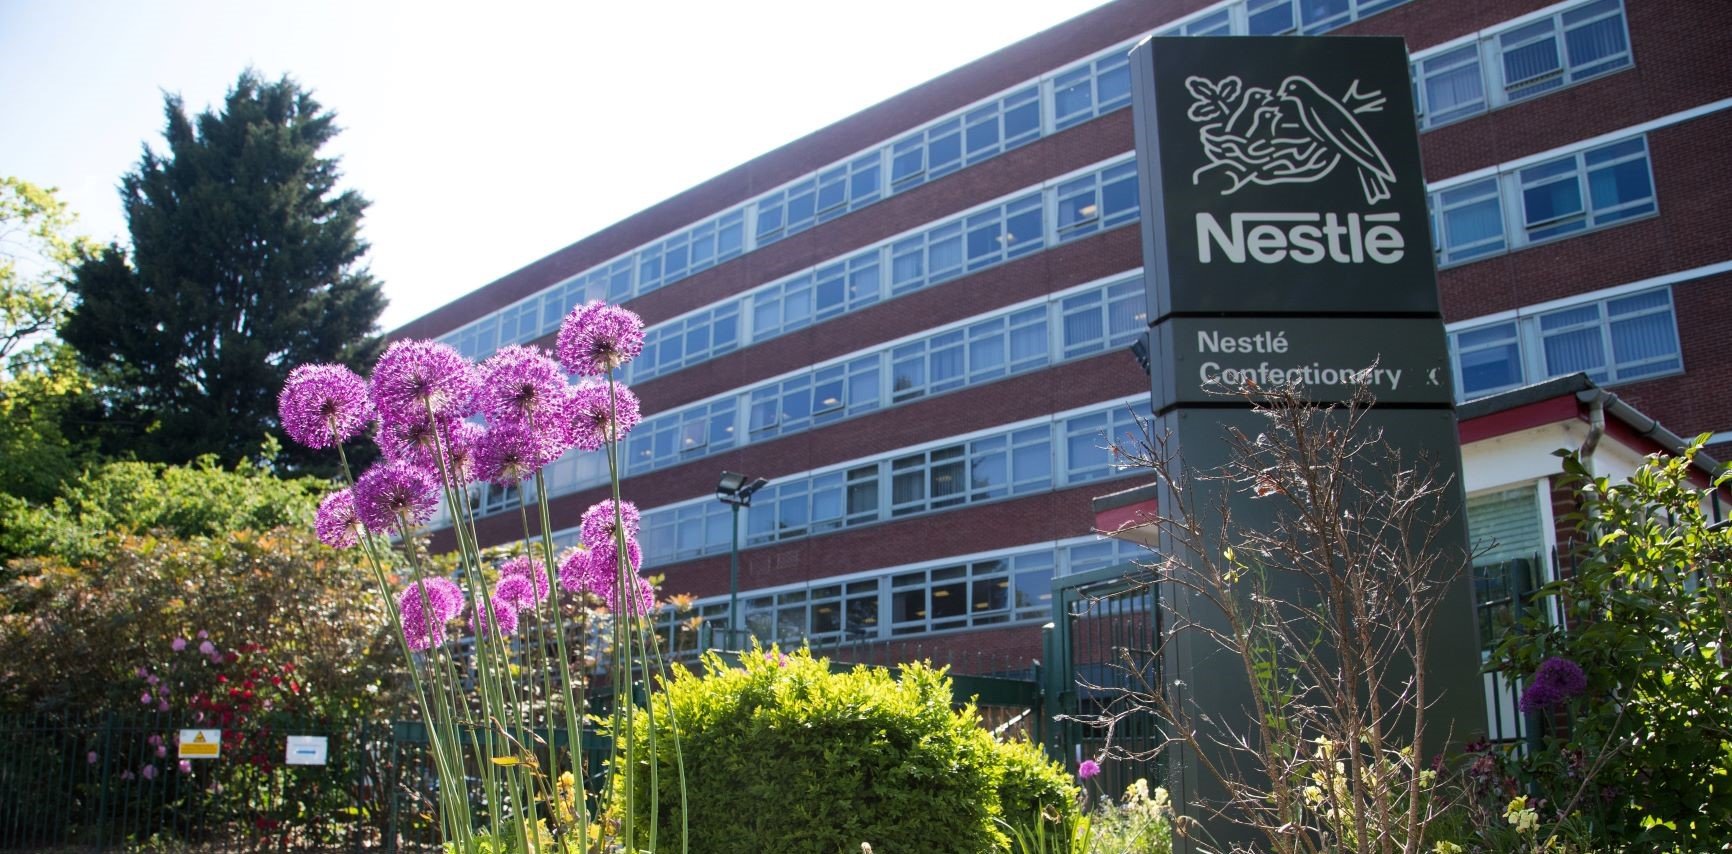 Nestlé announces £9 million office upgrade to create new post-pandemic workplace